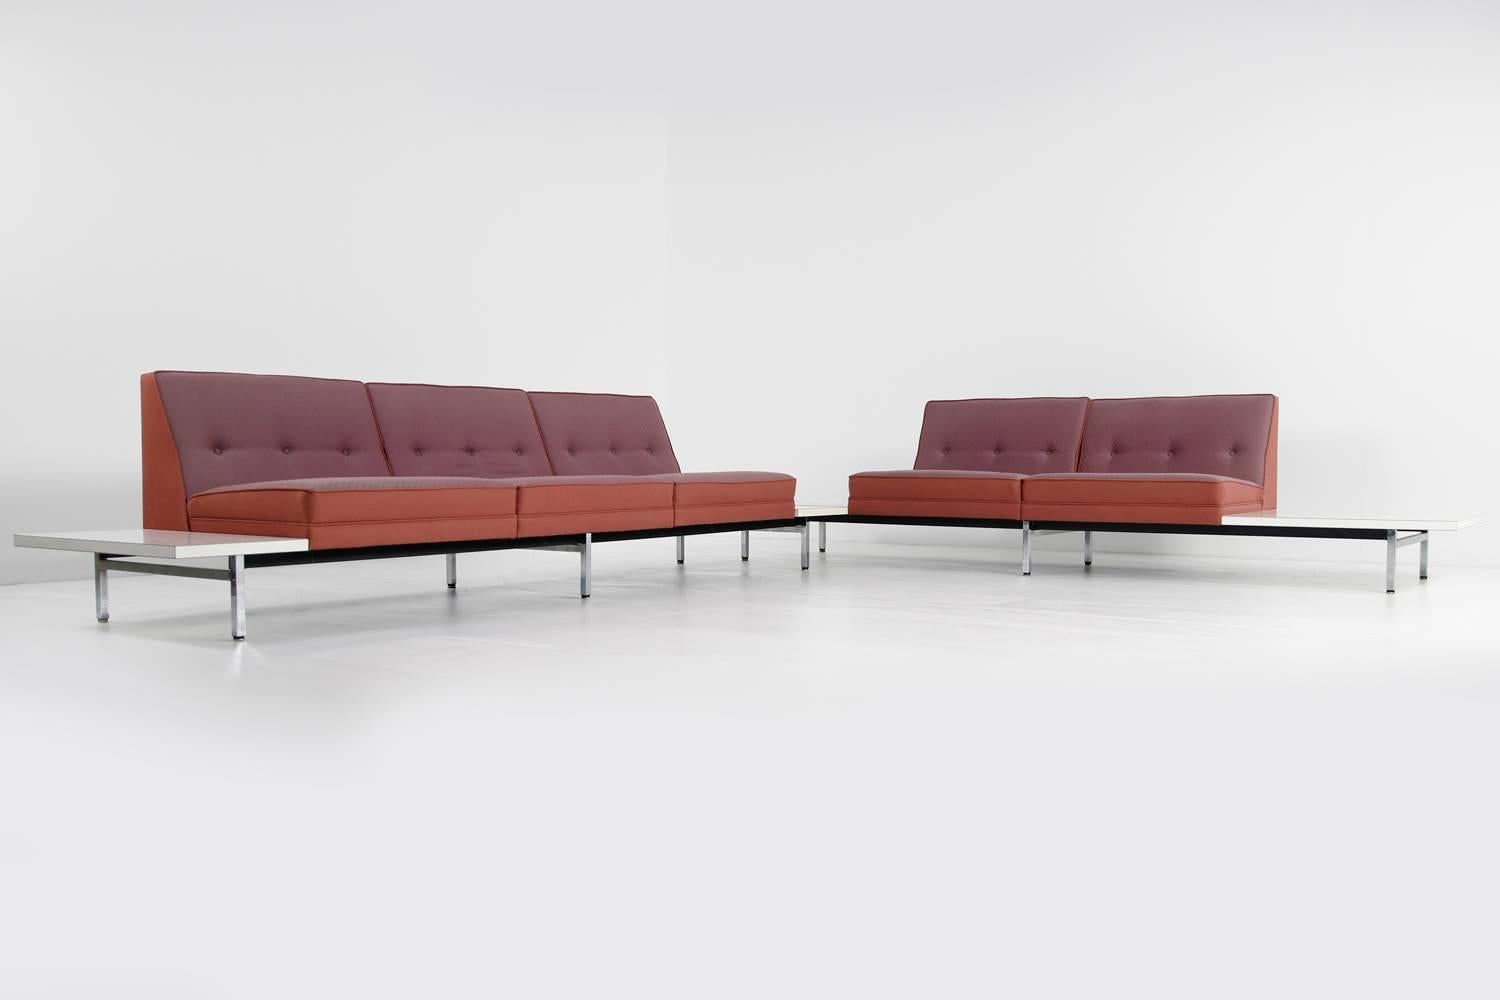 1970s George Nelson Modular Sofa and Tables Landscape Seating Herman Miller In Good Condition For Sale In Hamminkeln, DE